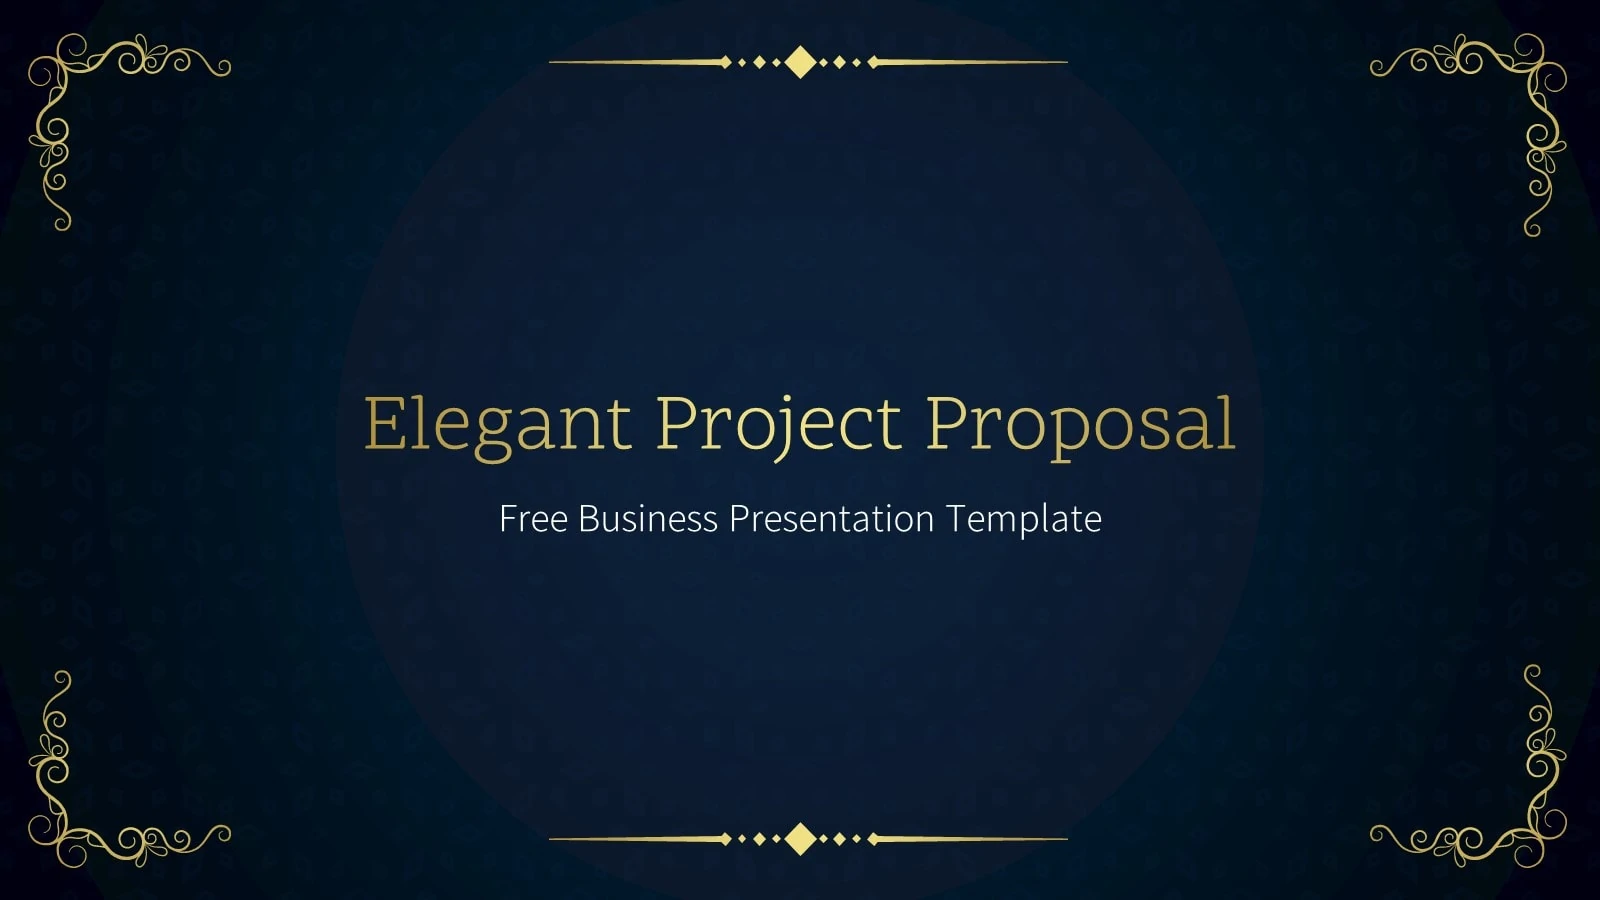 This is a preview of Elegant Project Proposal Presentation